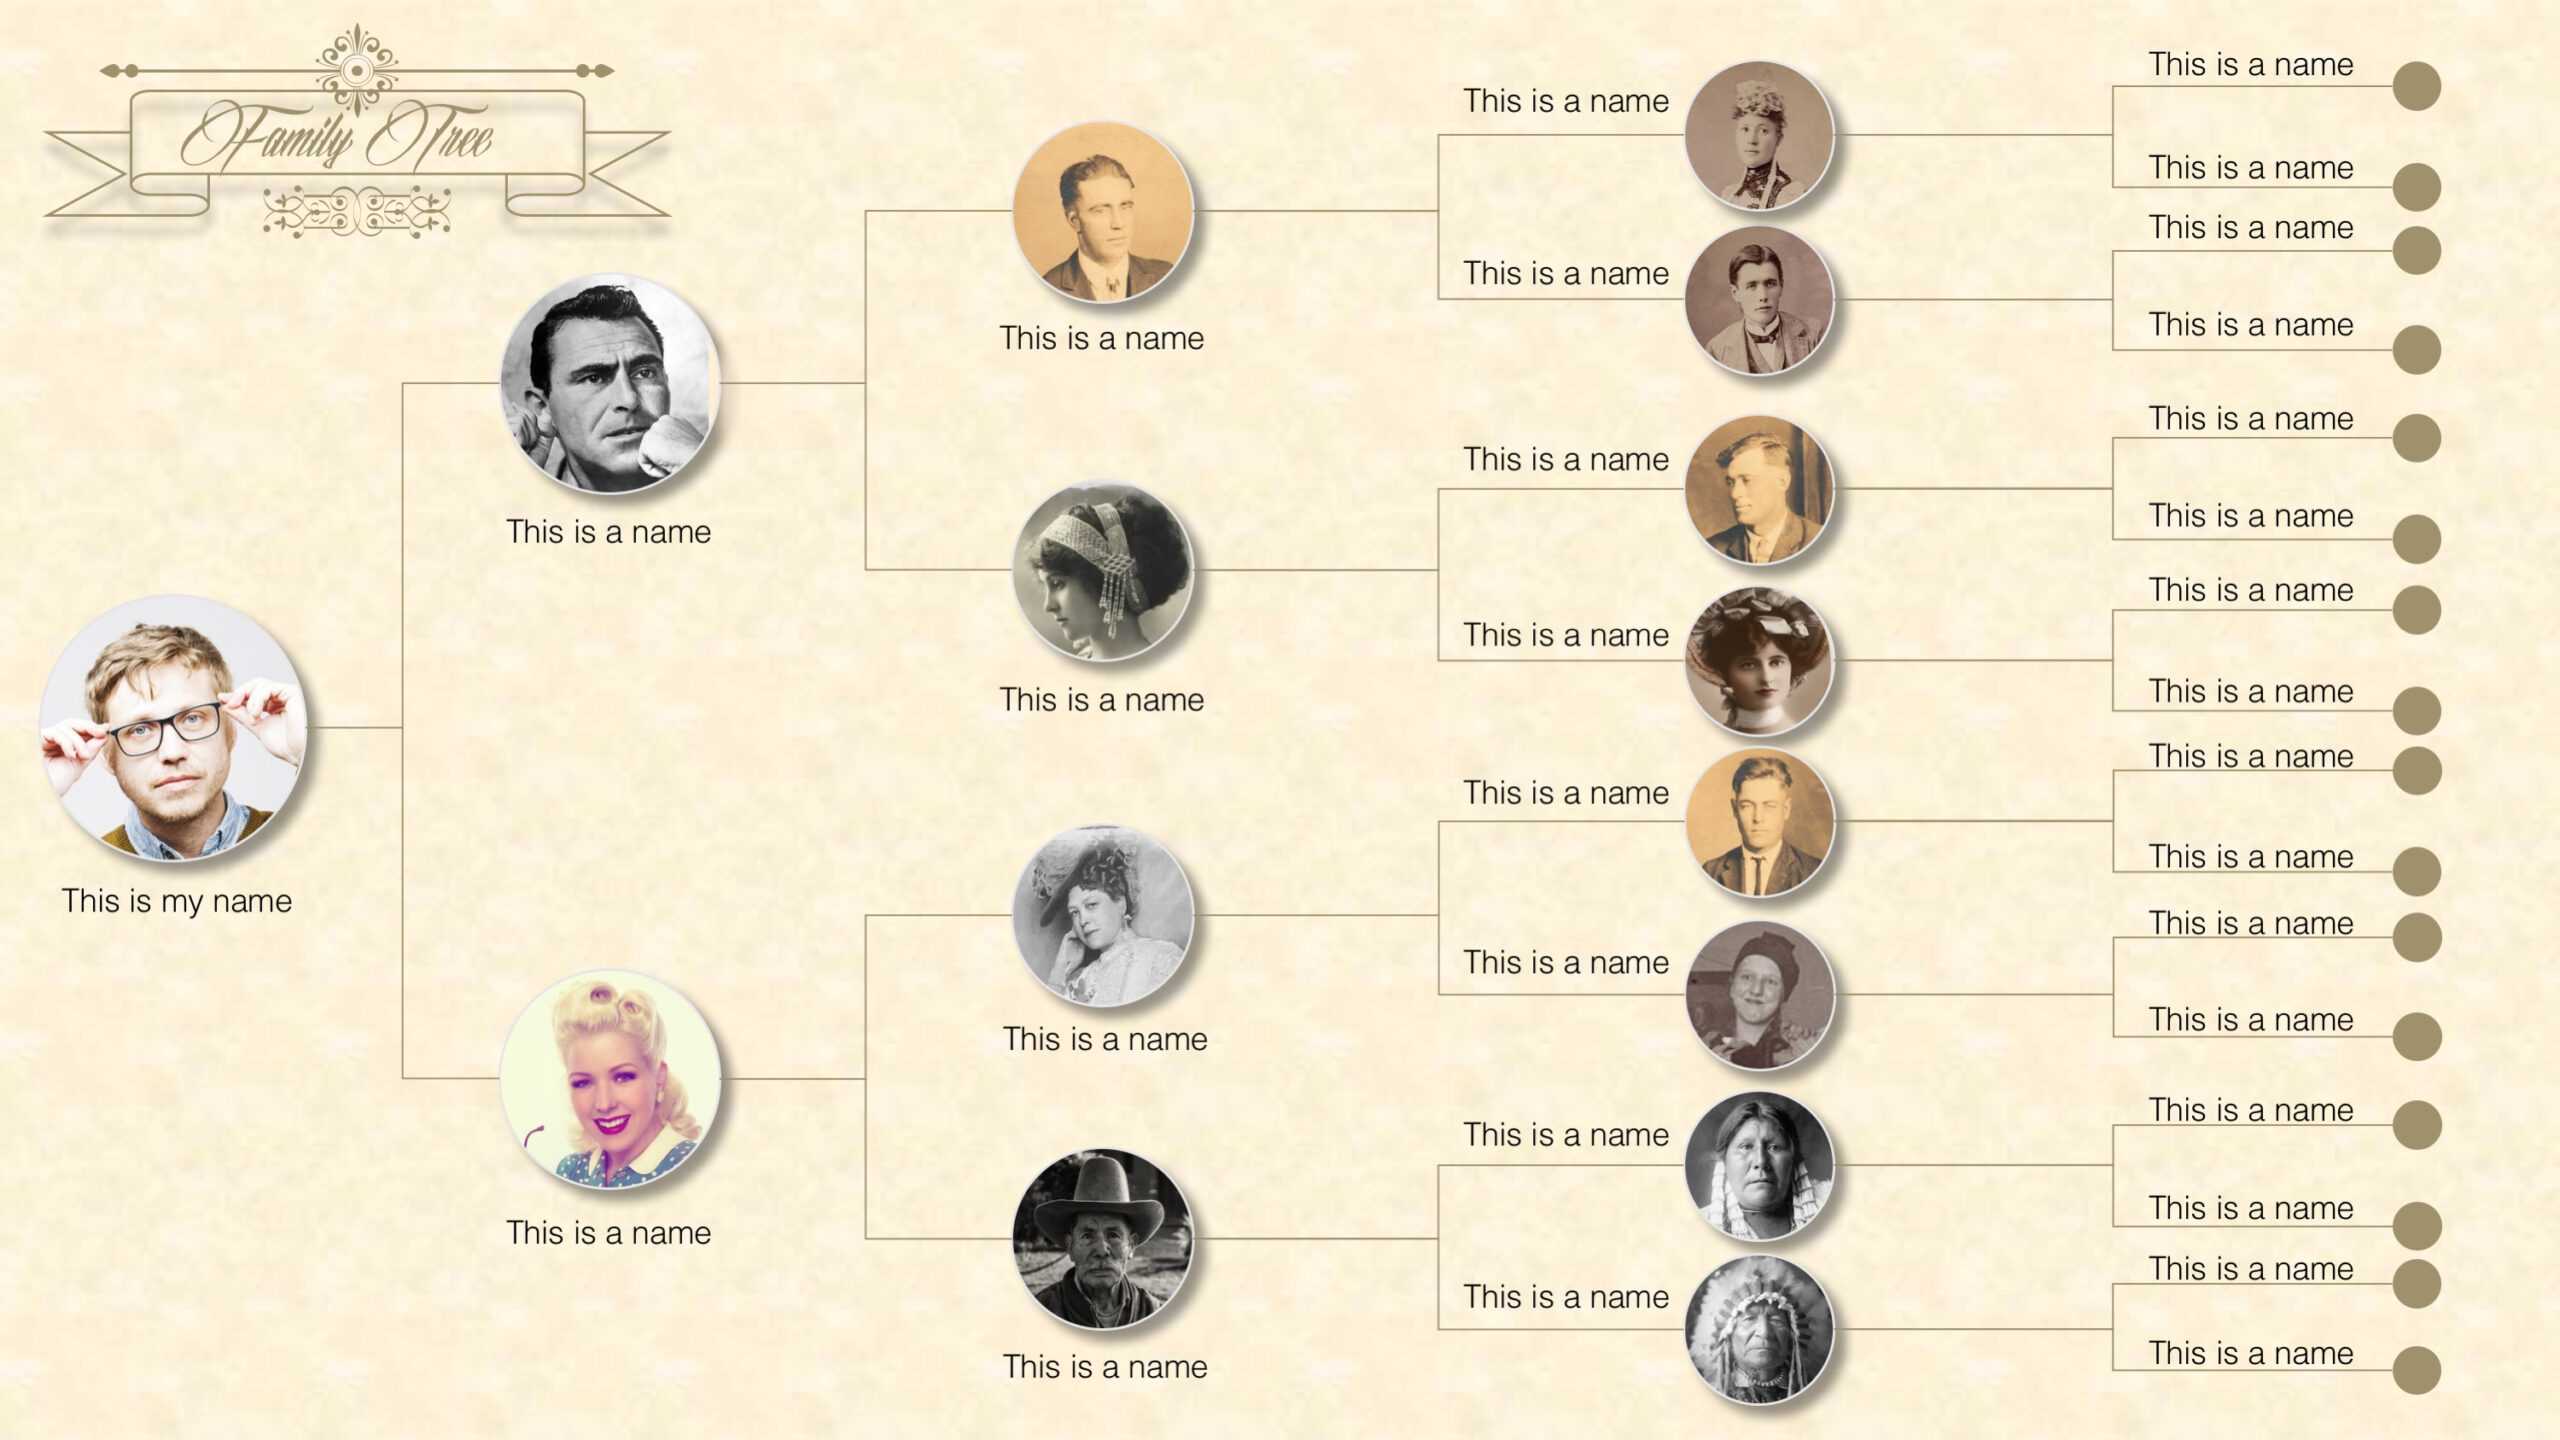 Family Tree Powerpoint Templates With Regard To Powerpoint Genealogy Template